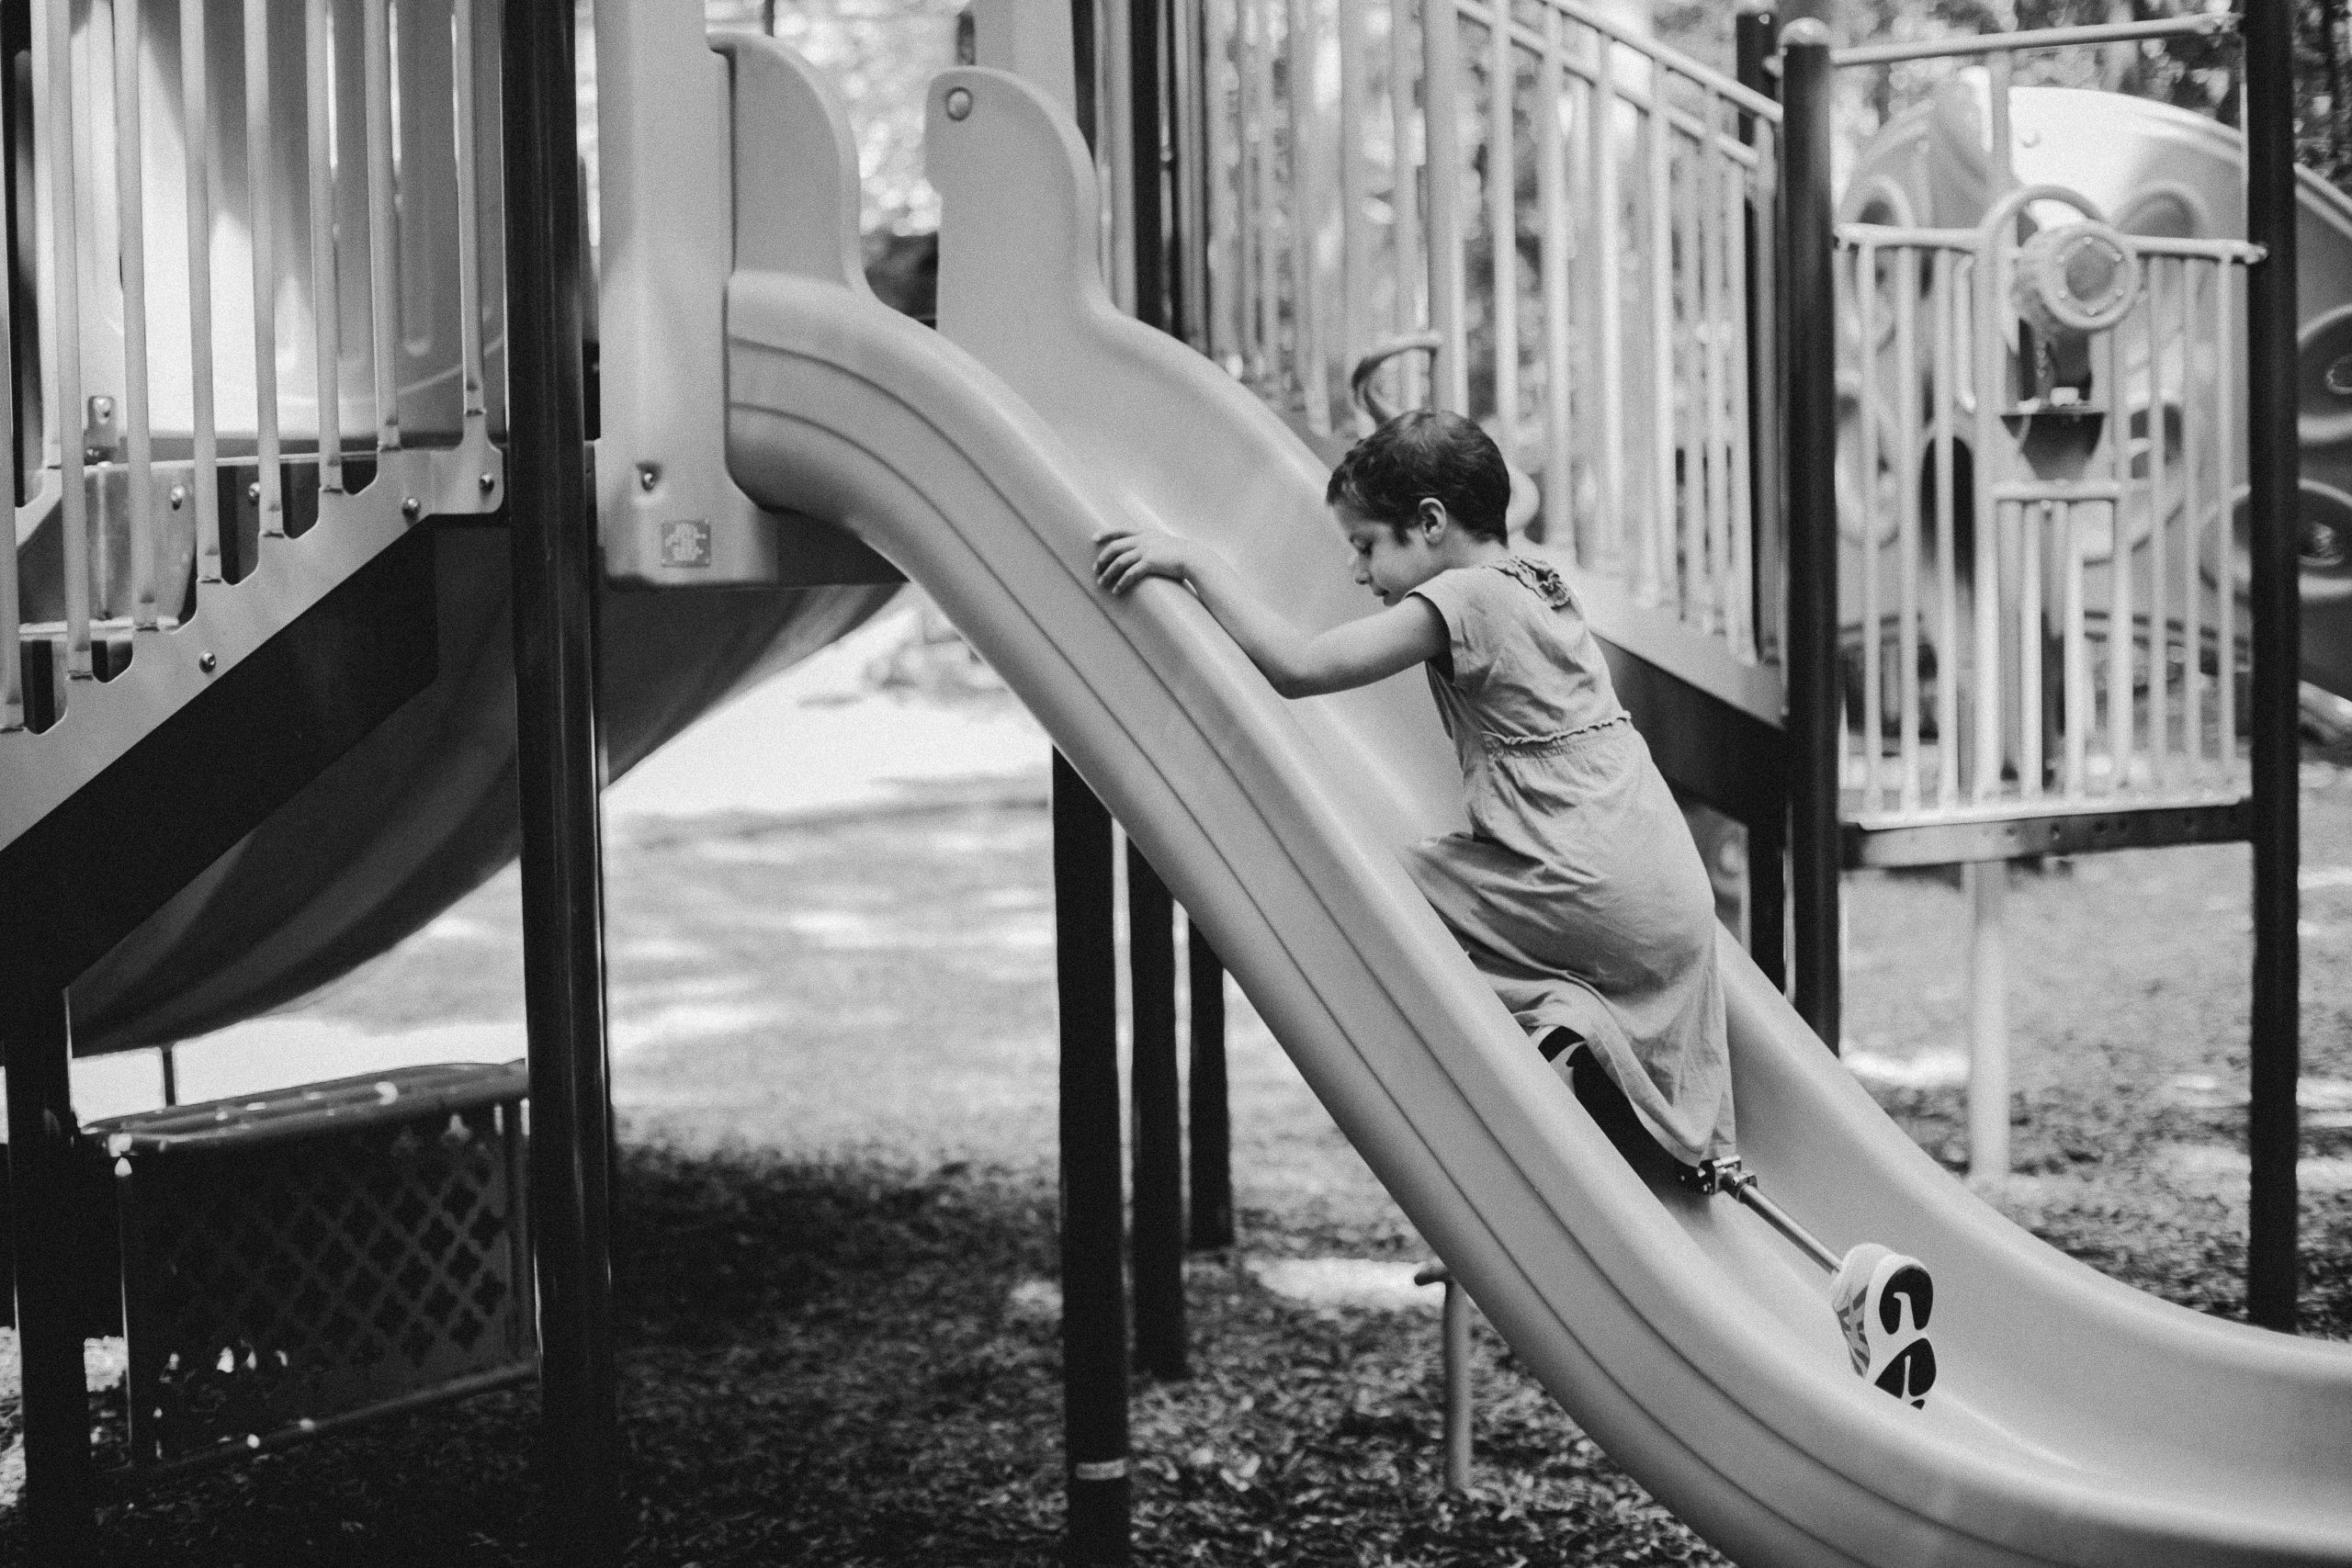 Image black and white photo of child climbing a slide